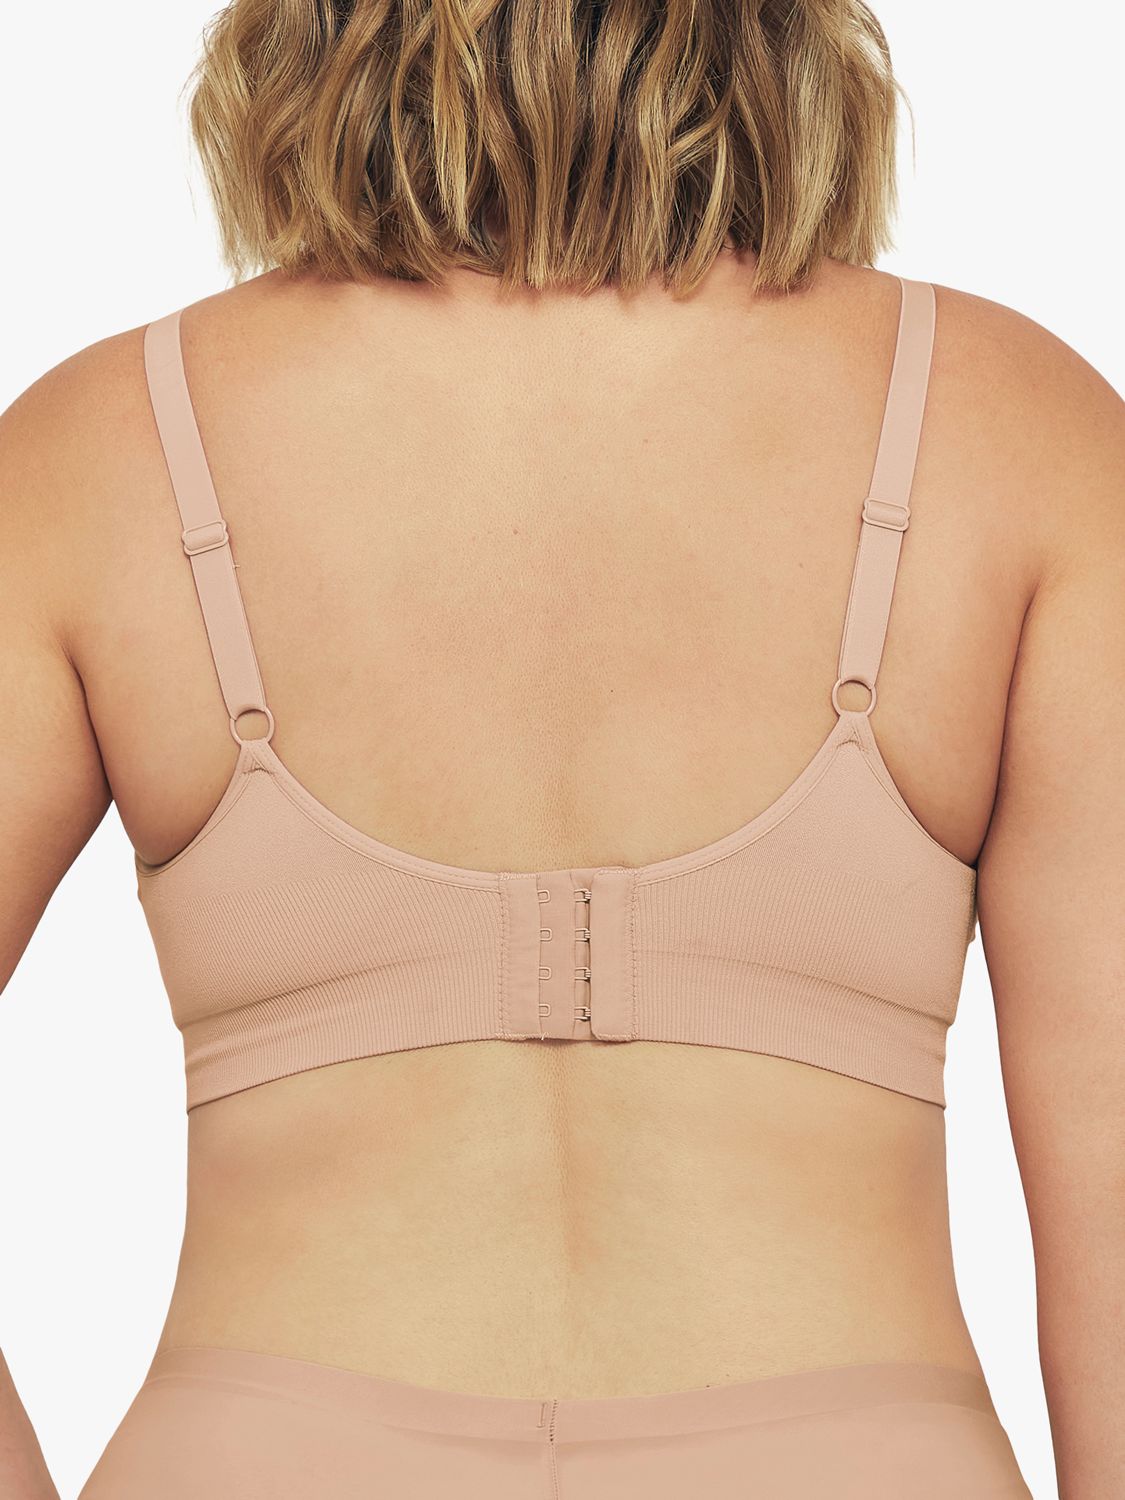 Ambra Curvesque Non Wired Support Bra, Nude at John Lewis & Partners